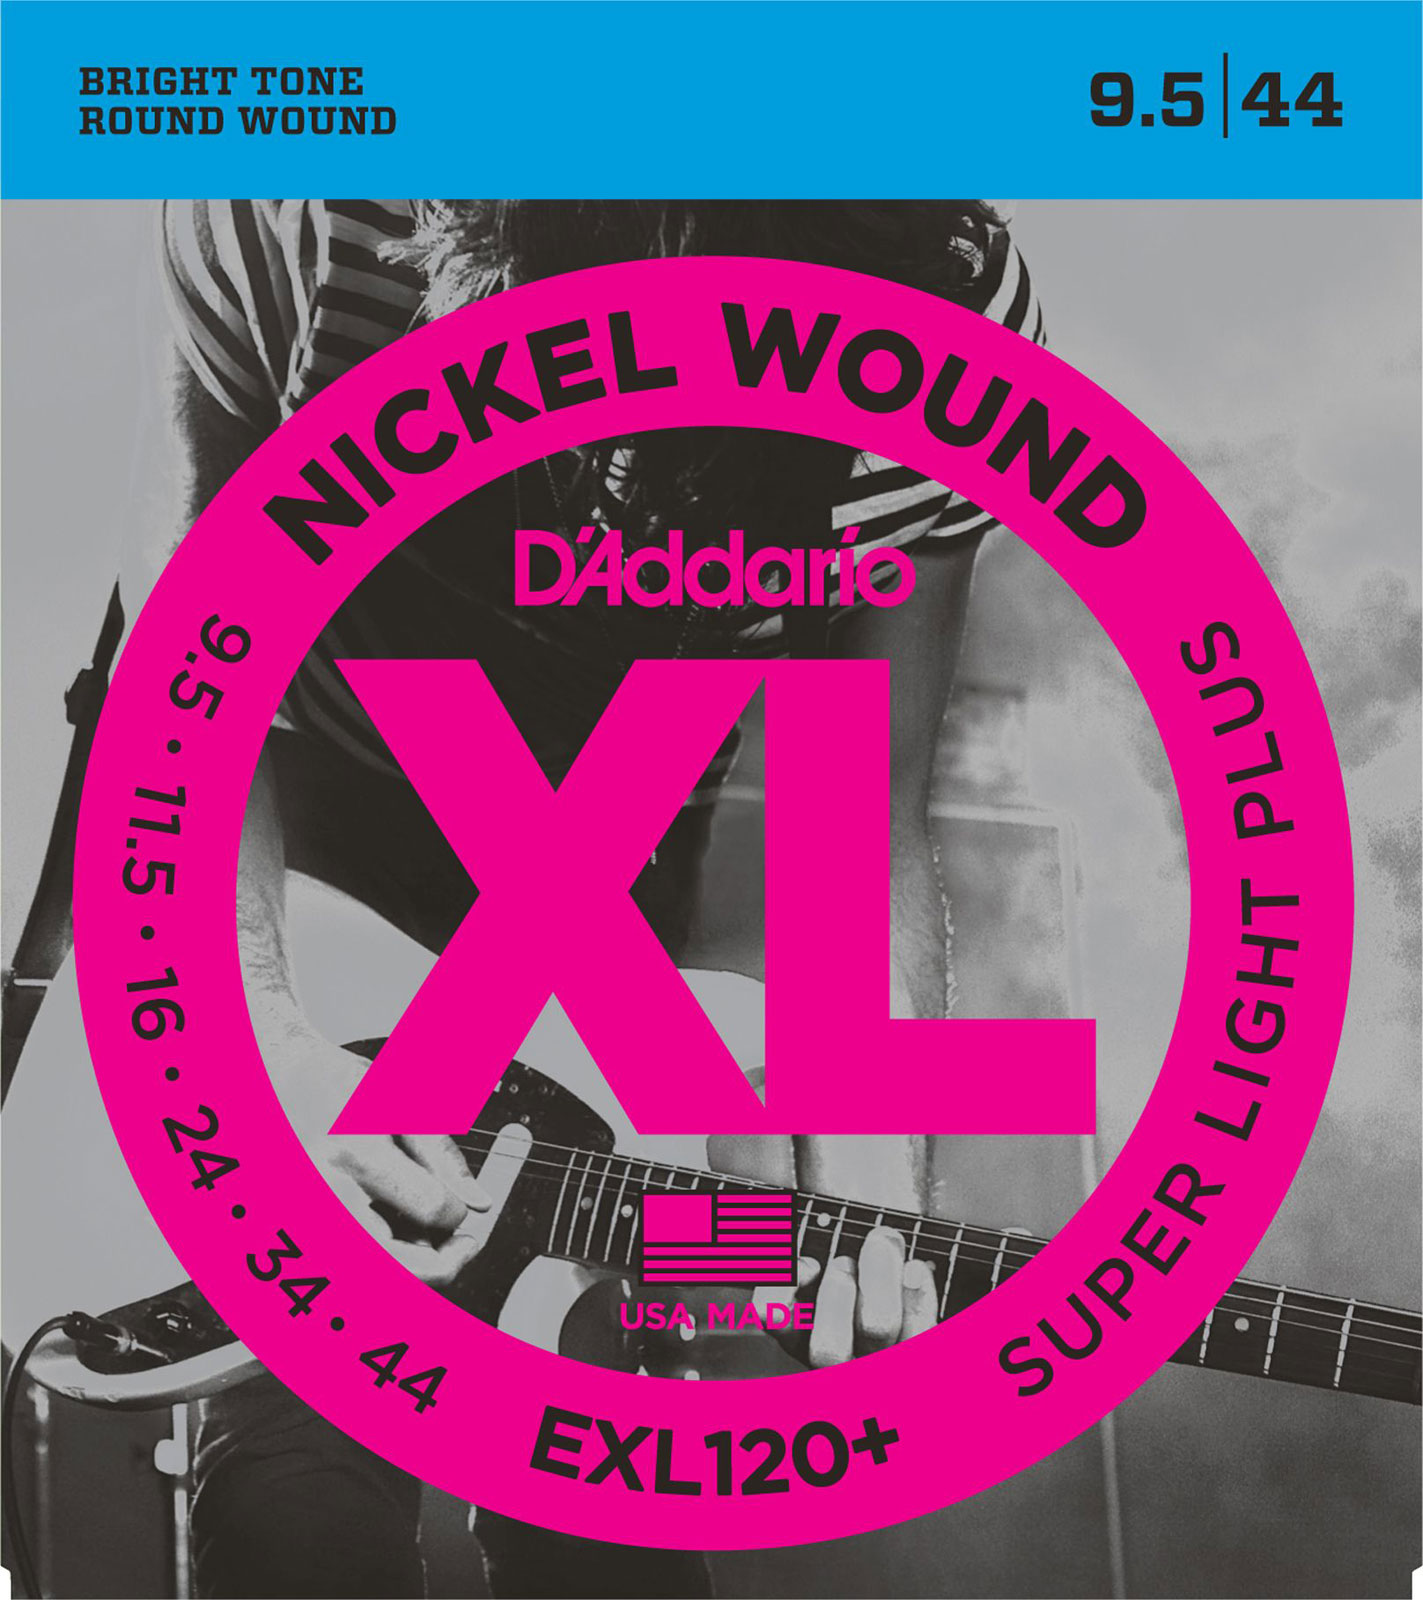 D'ADDARIO AND CO EXL120+ NICKEL WOUND ELECTRIC GUITAR STRINGS SUPER LIGHT PLUS 9.5-44